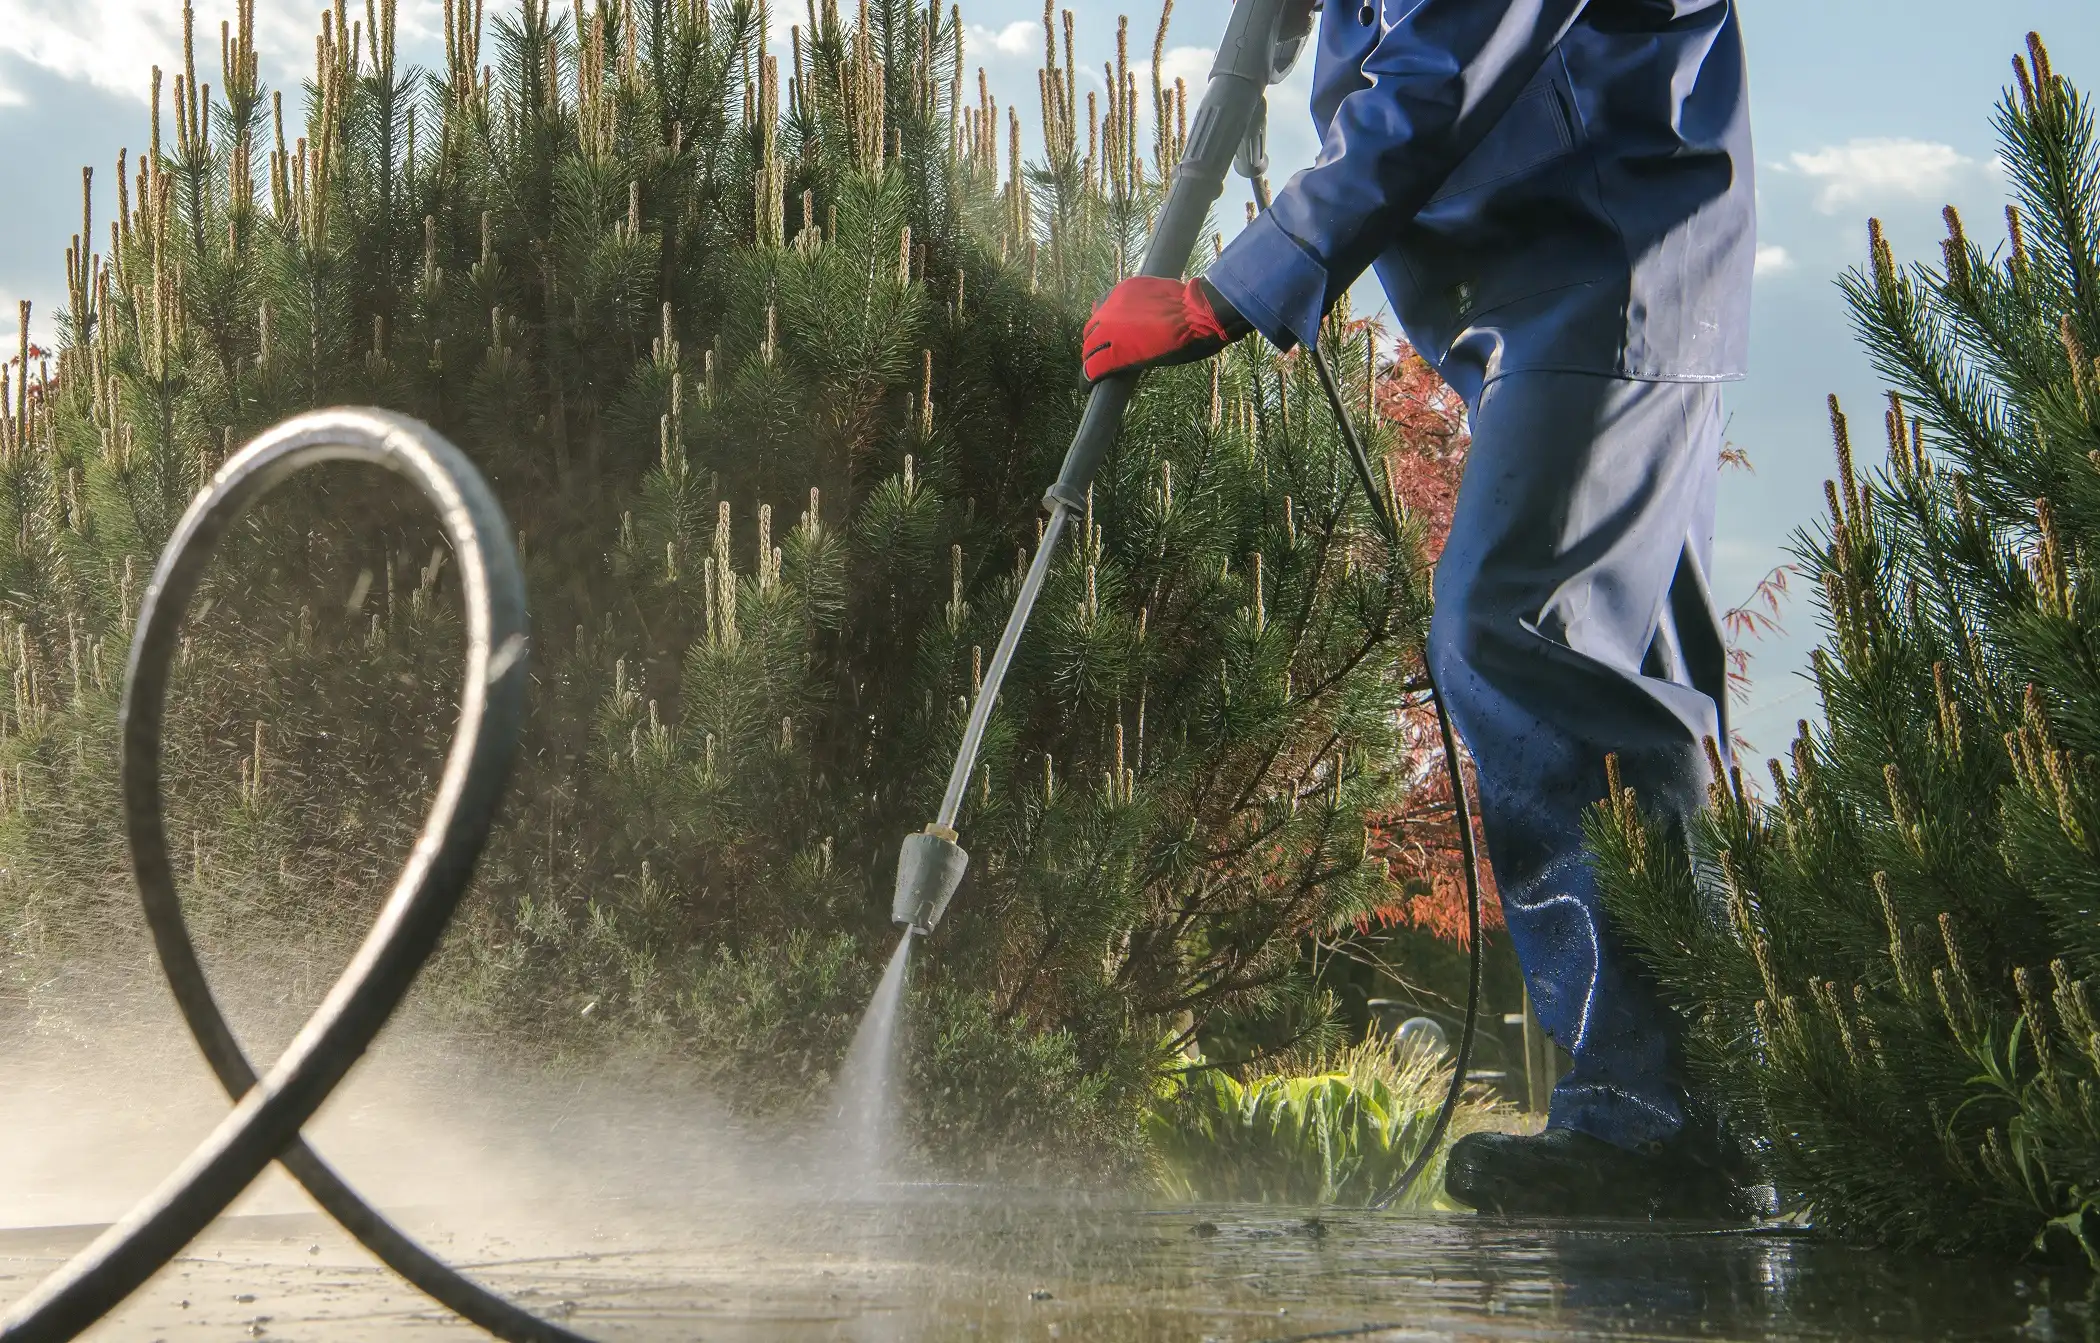 Top Rated Power Washers for Home Use